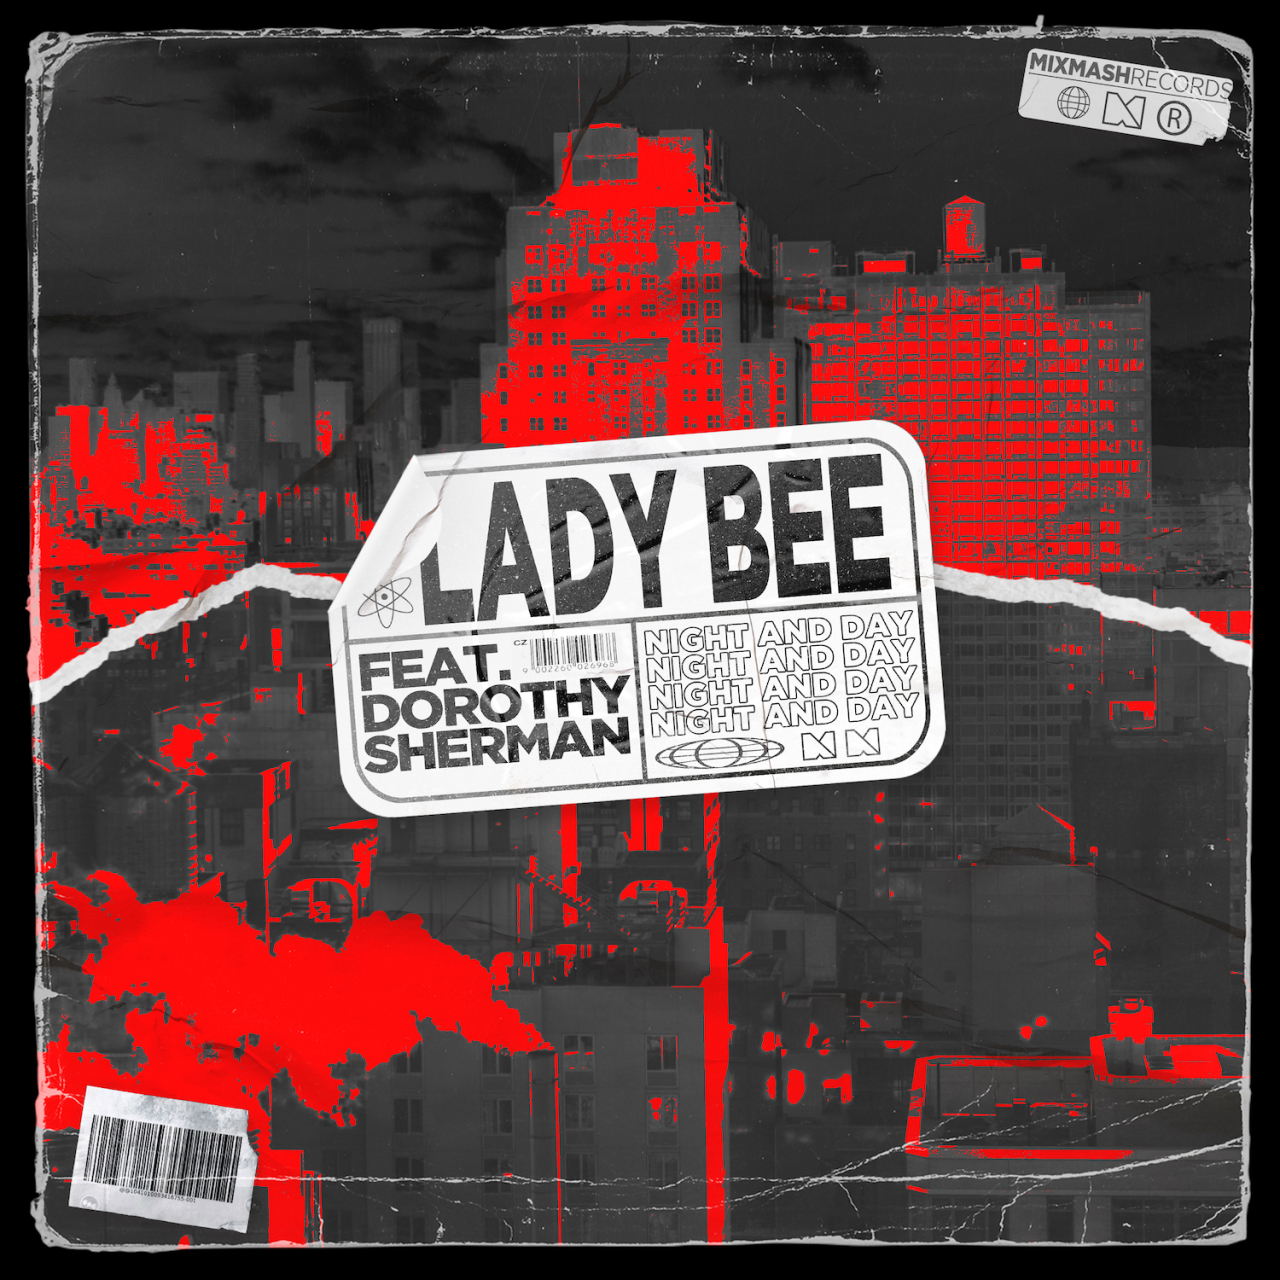 A Heavy Bass With An Urban Feel To It: ‘Night And Day’ By Lady Bee